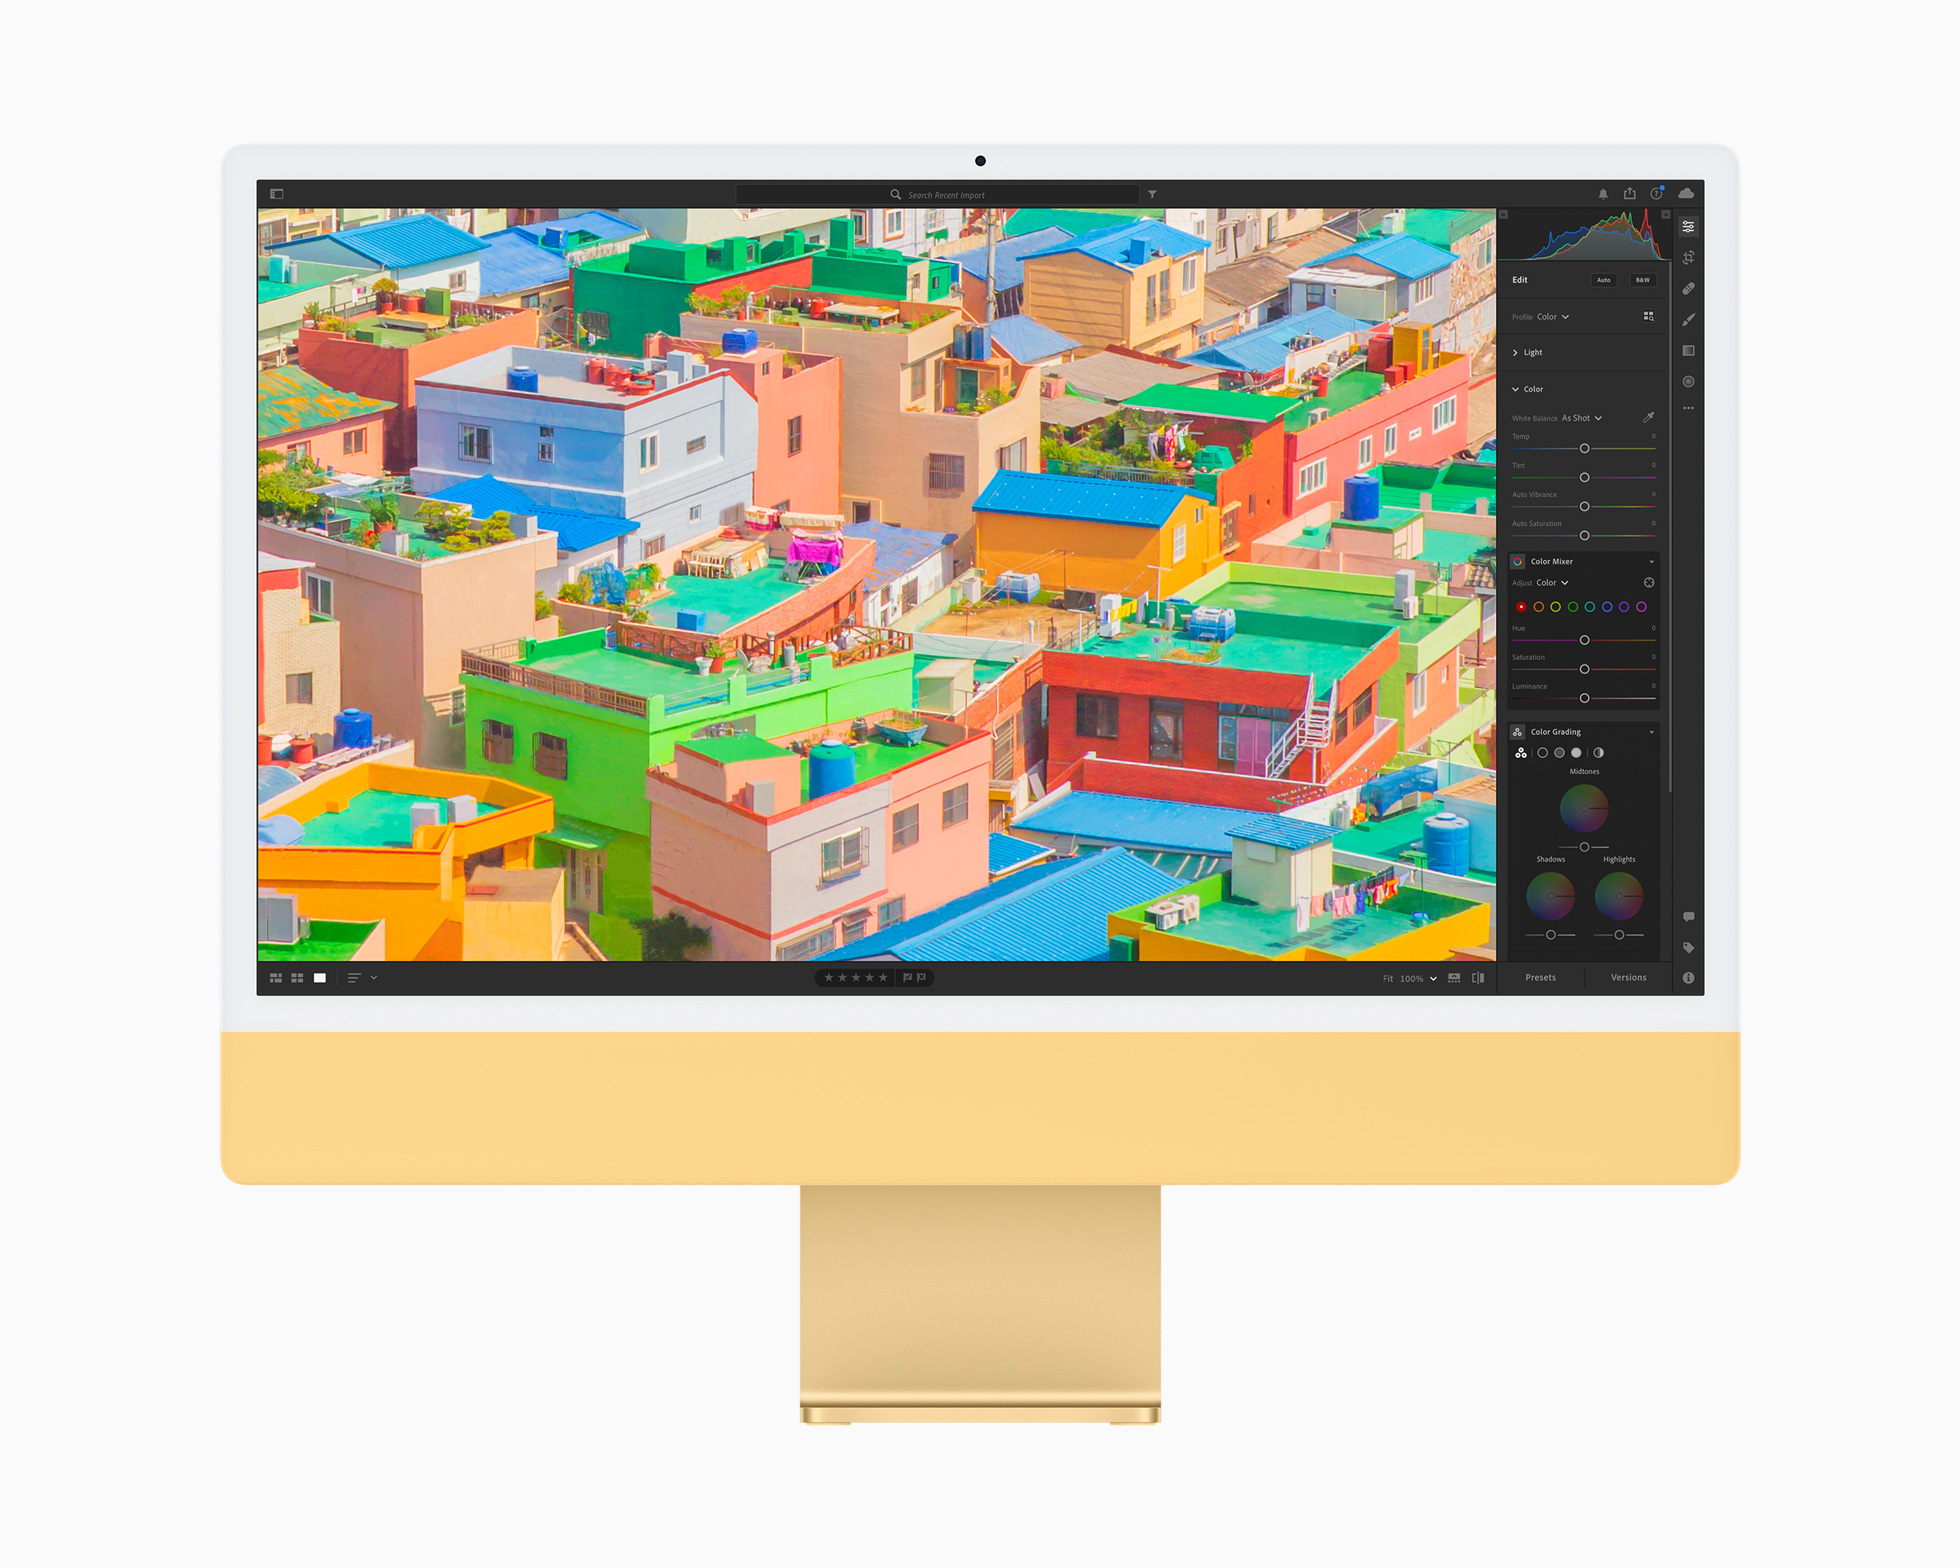 iMac features allnew design in vibrant colors, M1 chip, and 4.5K